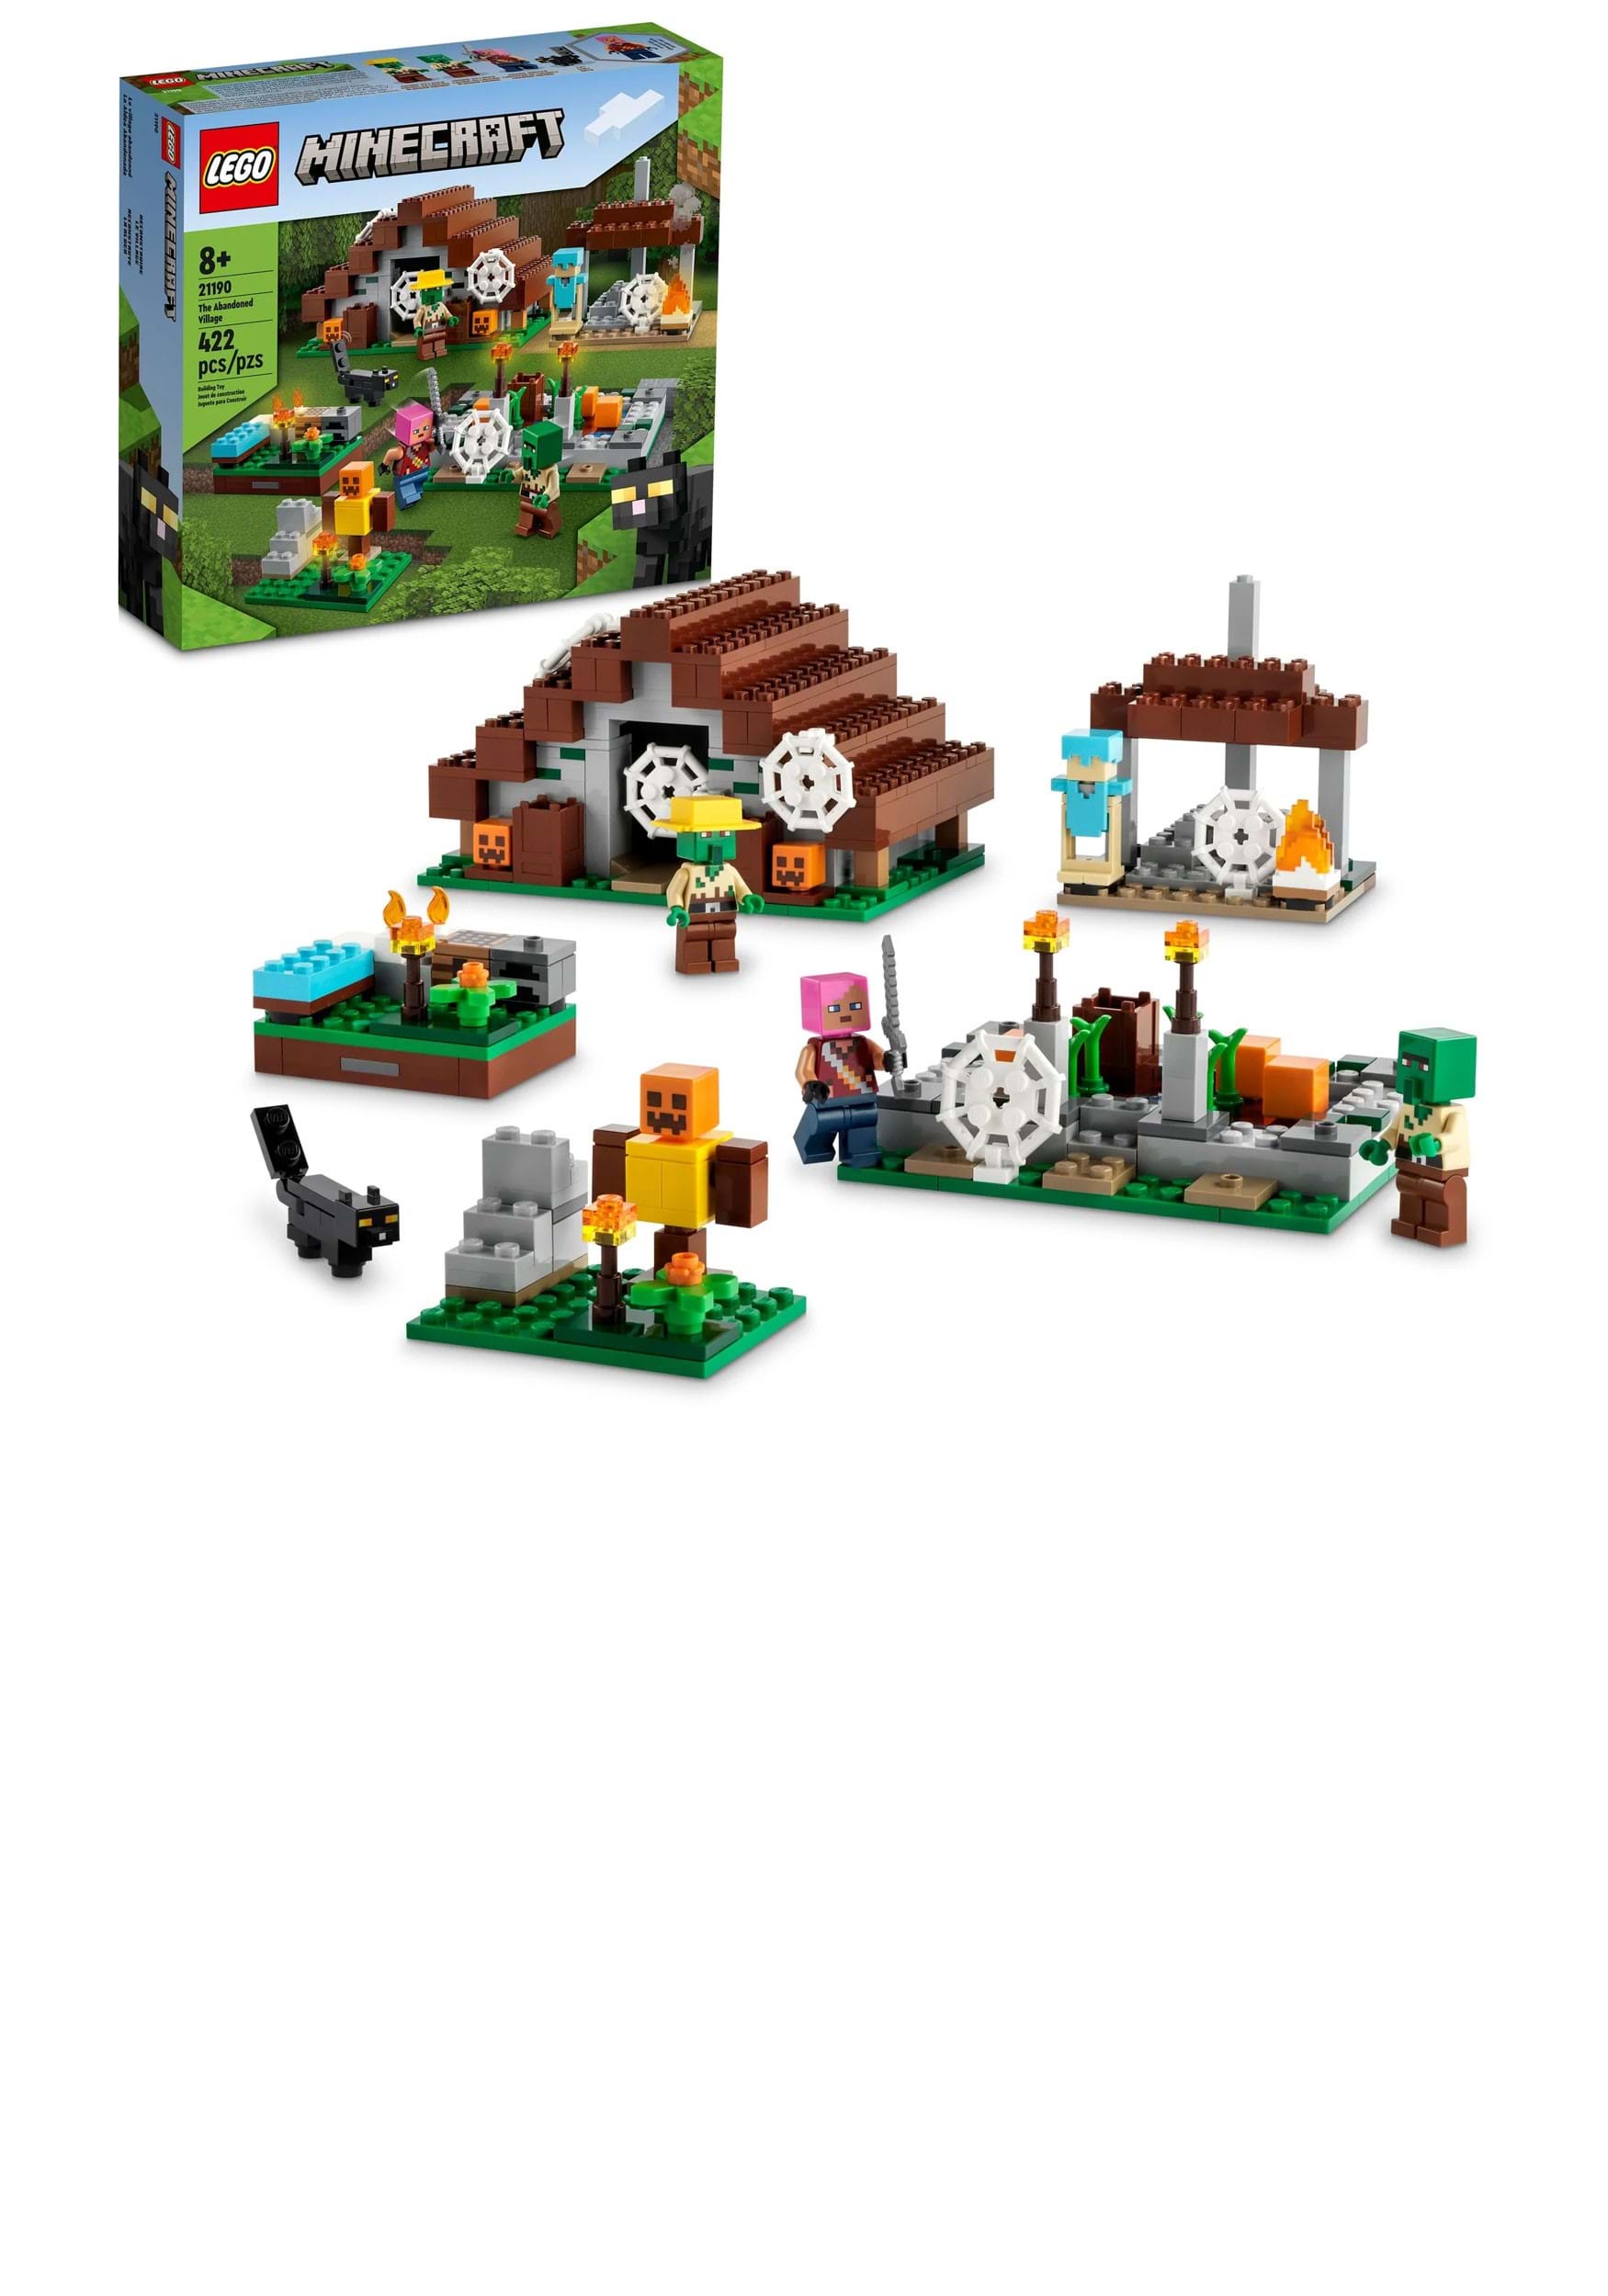 LEGO Minecraft The Abandoned Village Building Toy Set 21190, Featuring Game  Figures Including Zombies and Zombie Hunters with Accessories, Minecraft